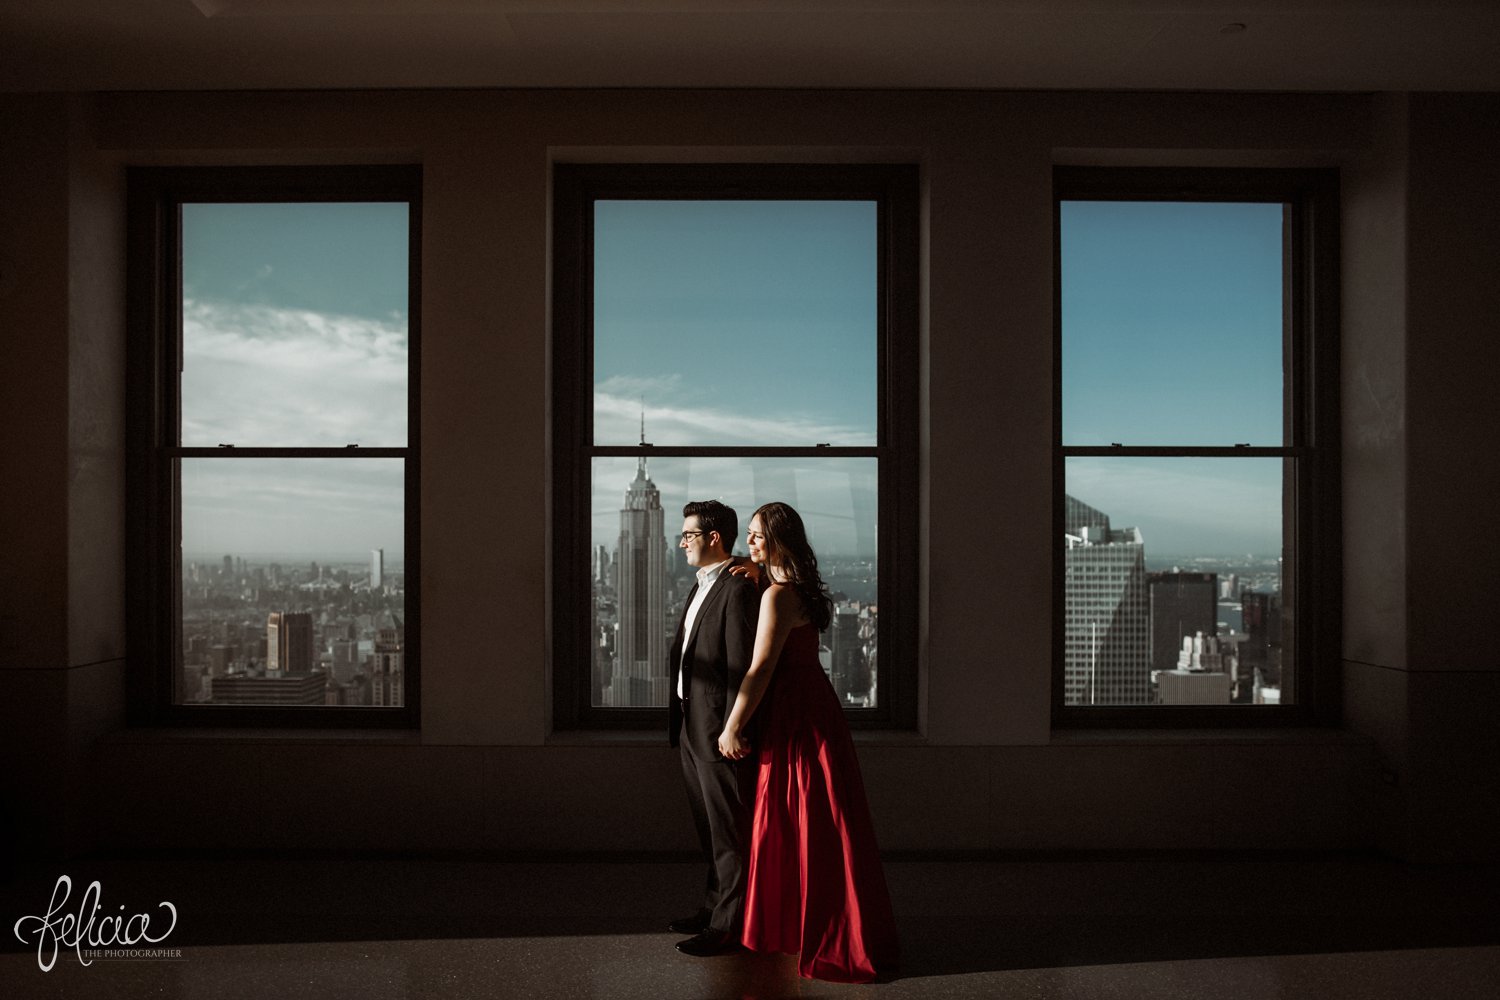 images by feliciathephotographer.com | destination wedding photographer | engagement | new york city | skyline | downtown | urban | formal | classic | elegant | long red gown | suit and tie | top of the rock | sunrise | elegant | glam | 